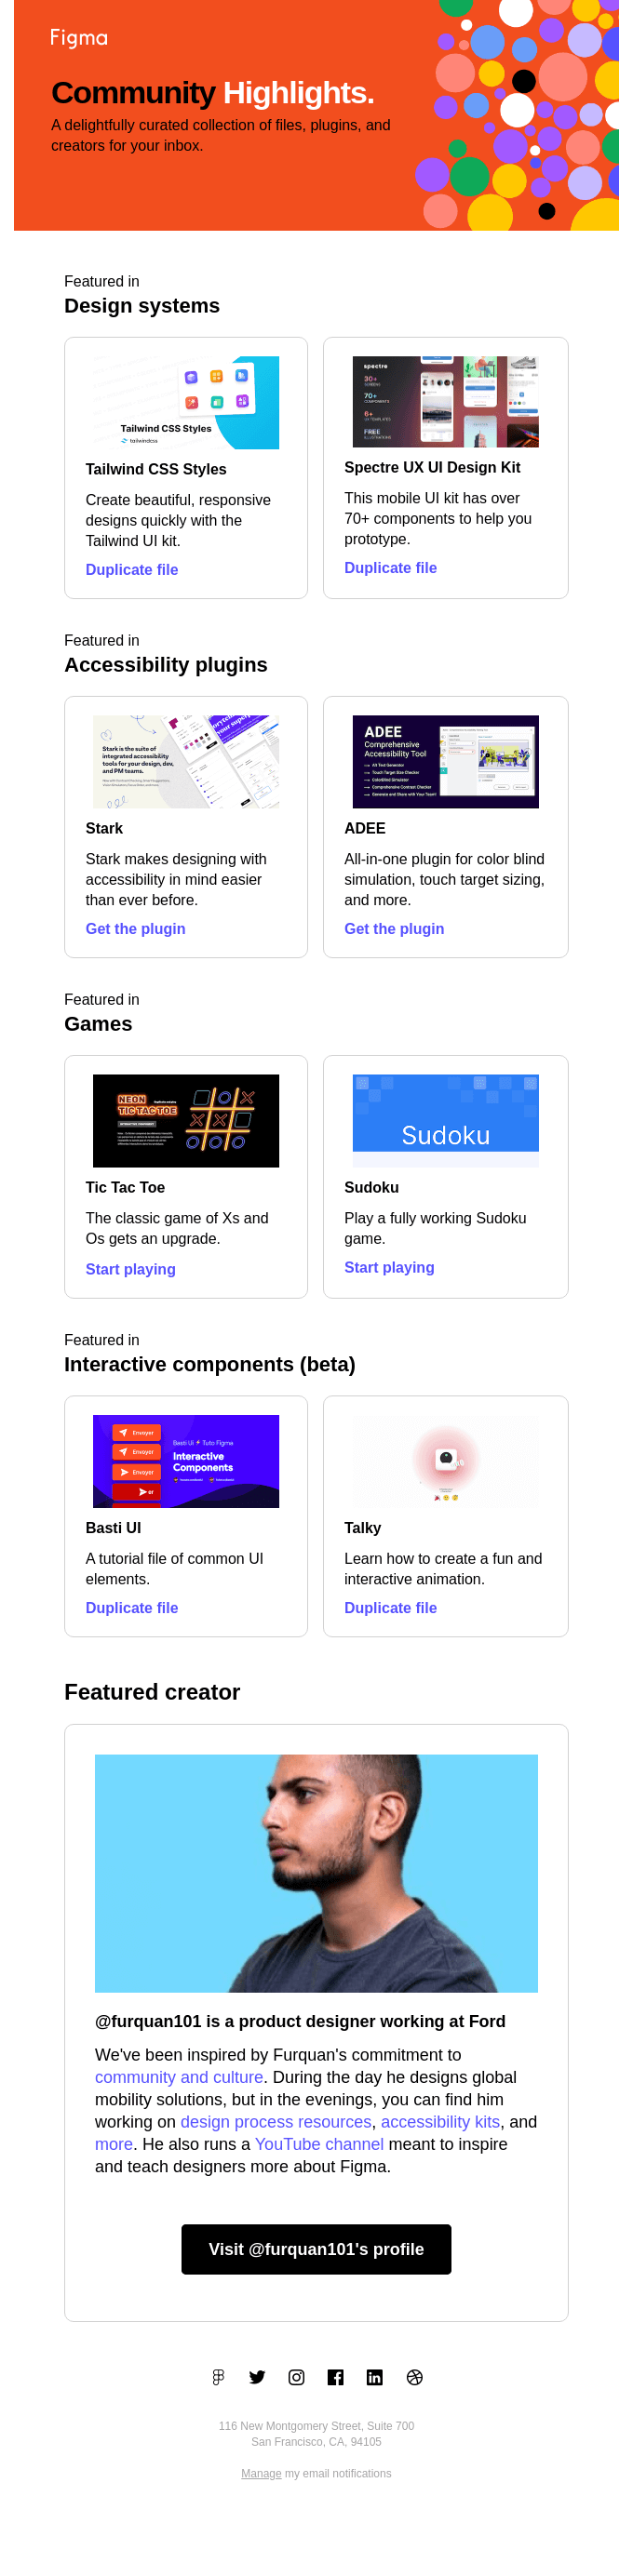 Freshly picked from Figma 🍎: Accessibility plugins, games, and more